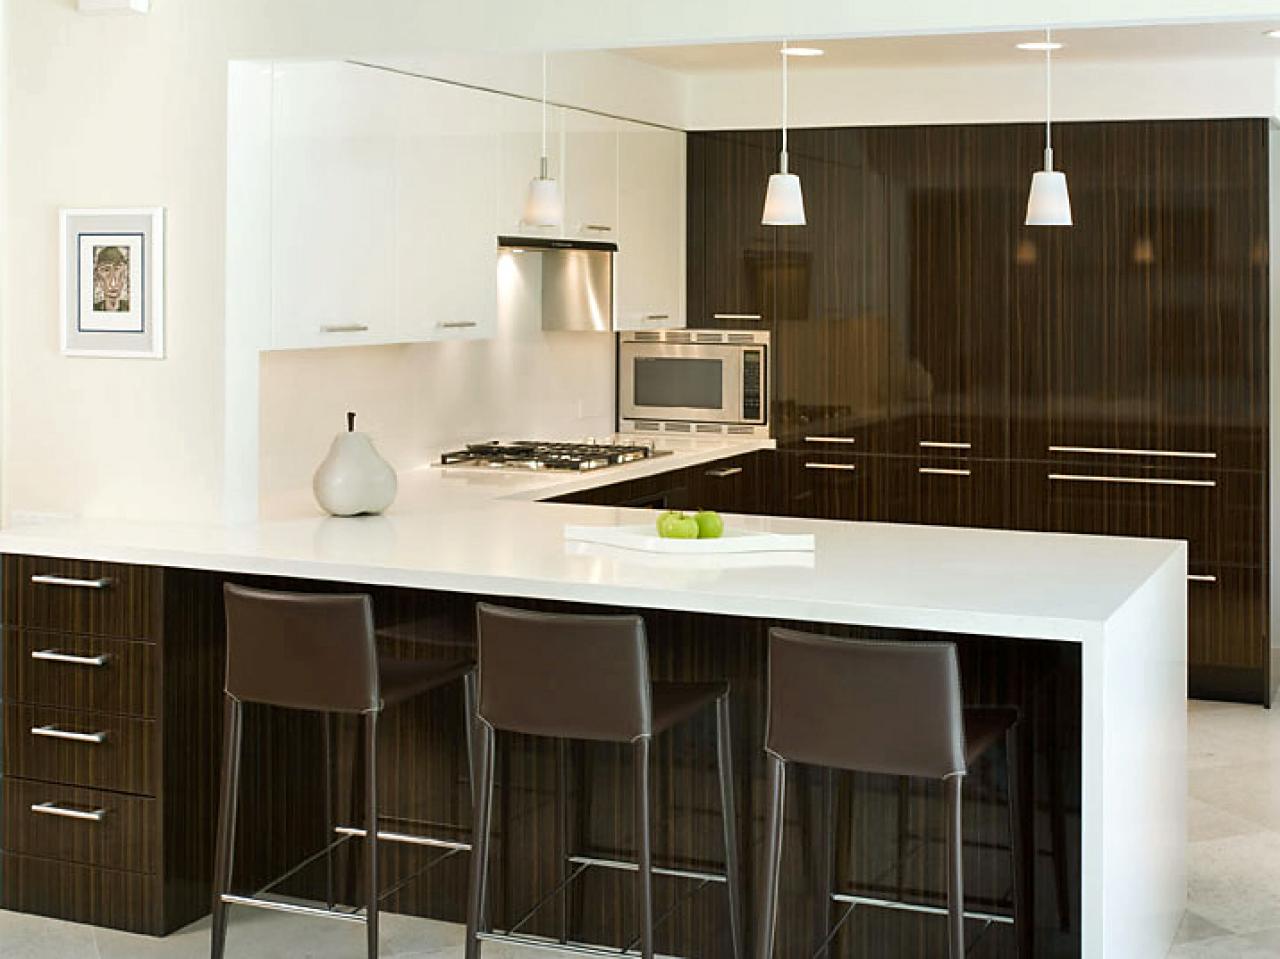 Peninsula Kitchen Design Pictures, Ideas & Tips From HGTV